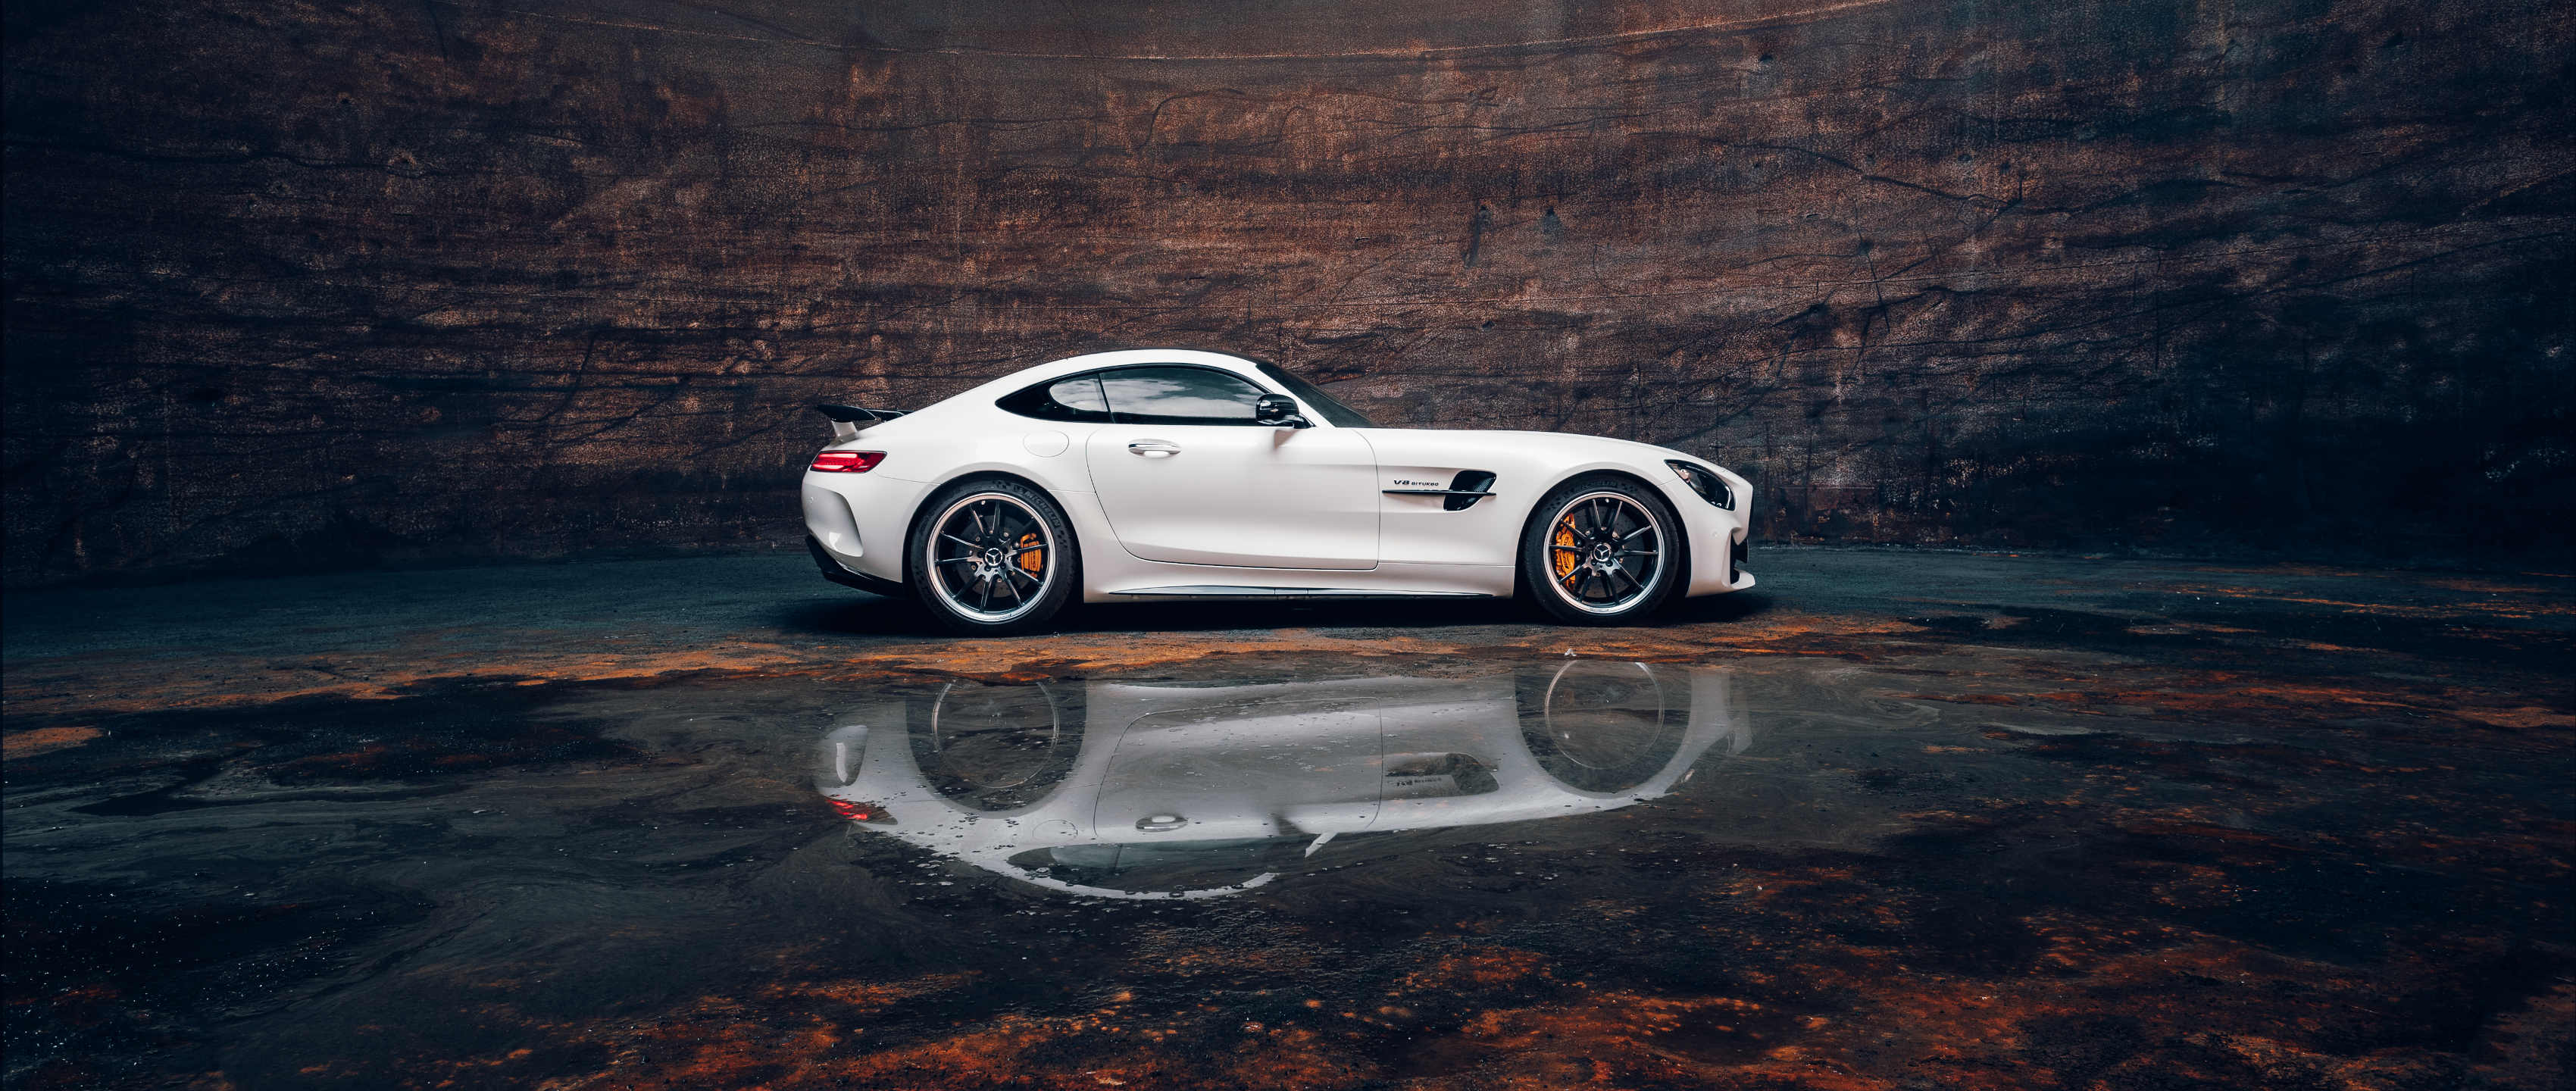 The Side View Of The Mercedes Amg Gt R In Designo Diamond - Mercedes Gtr Amg Iphone Wallpaper Hd - HD Wallpaper 